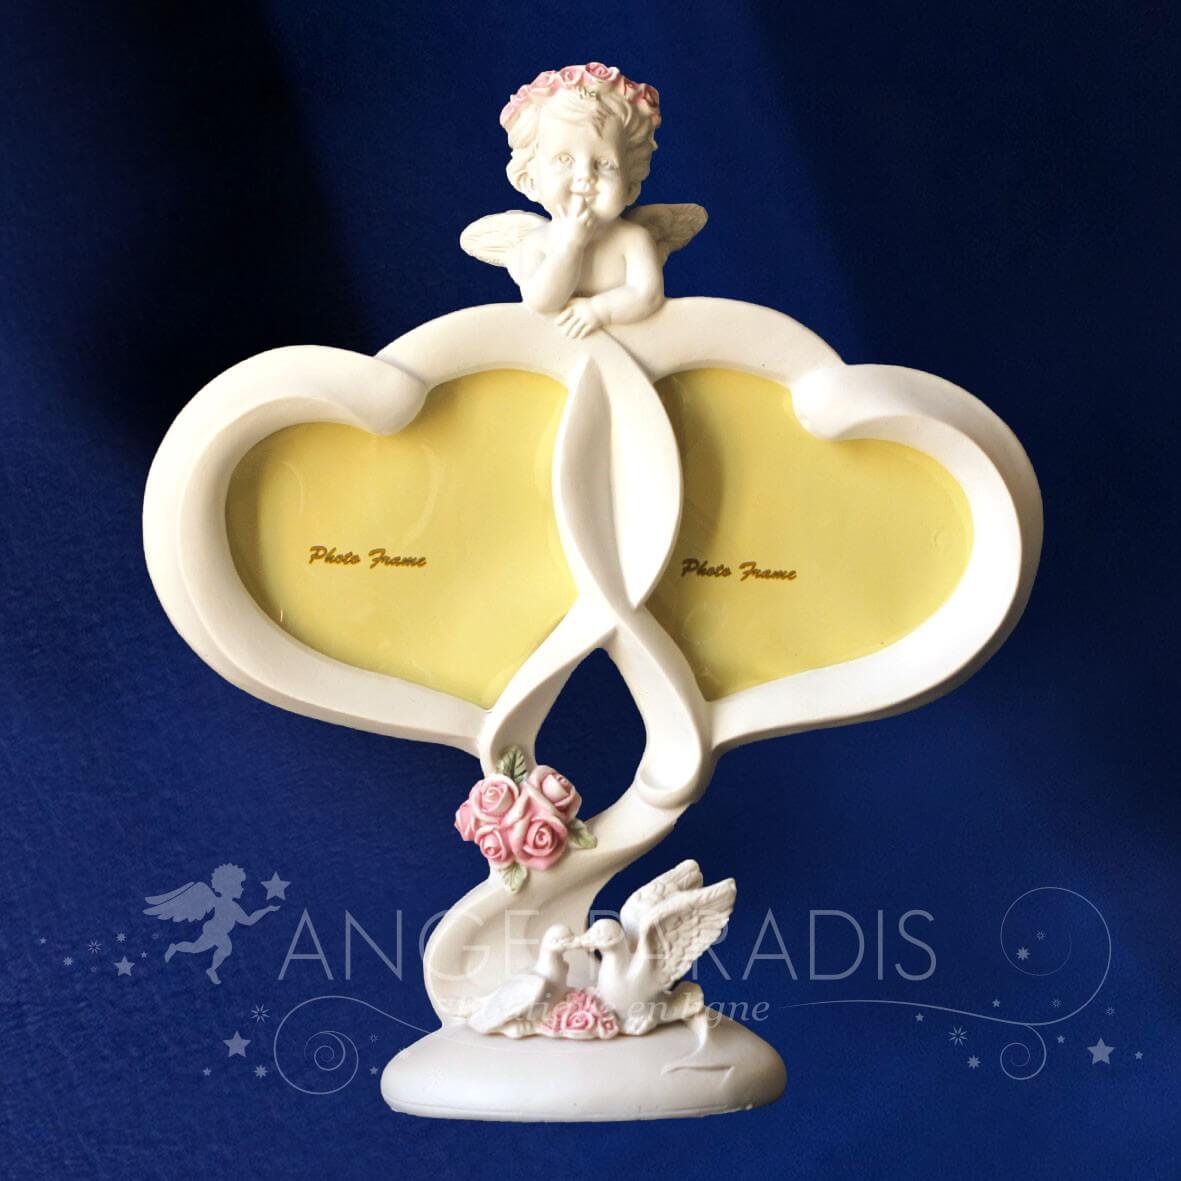 Cadre Photo Anges Special Love - 21cm